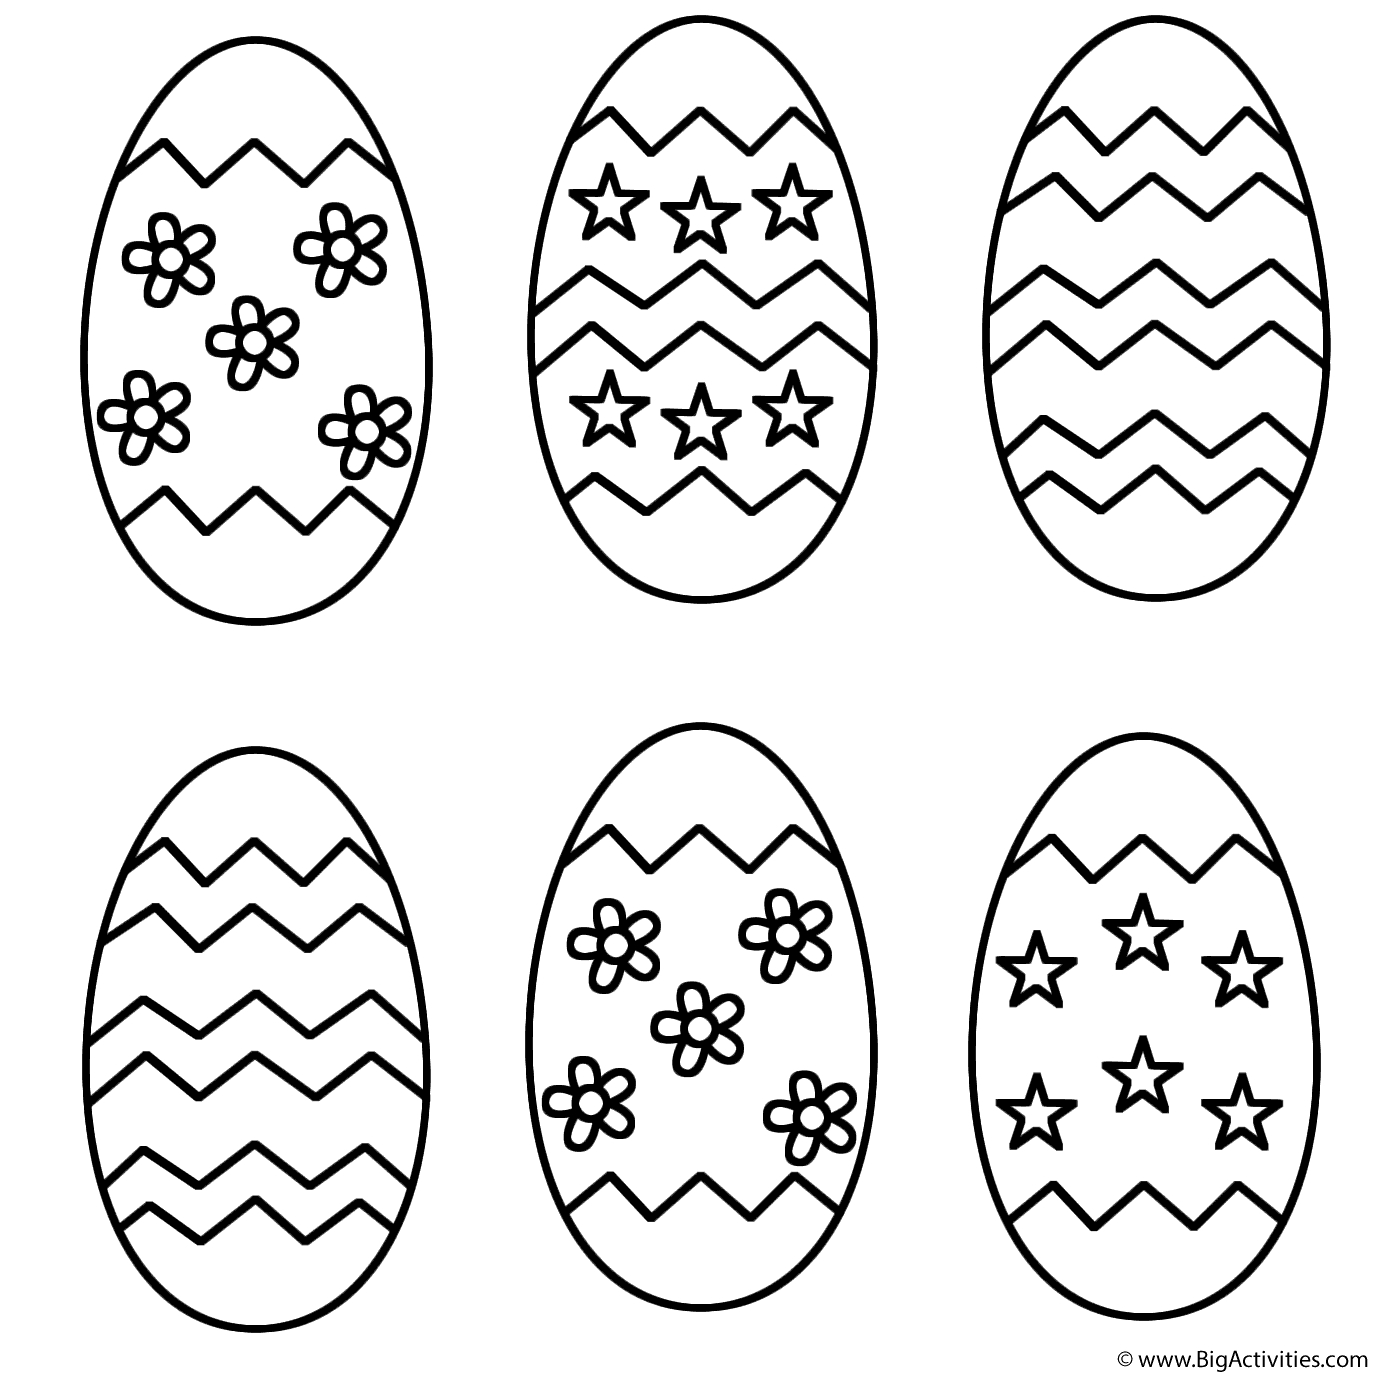 Easter Egg Coloring Page Coloring Coloring Easter Egg Pictures To Colour Russian Eggs Pages